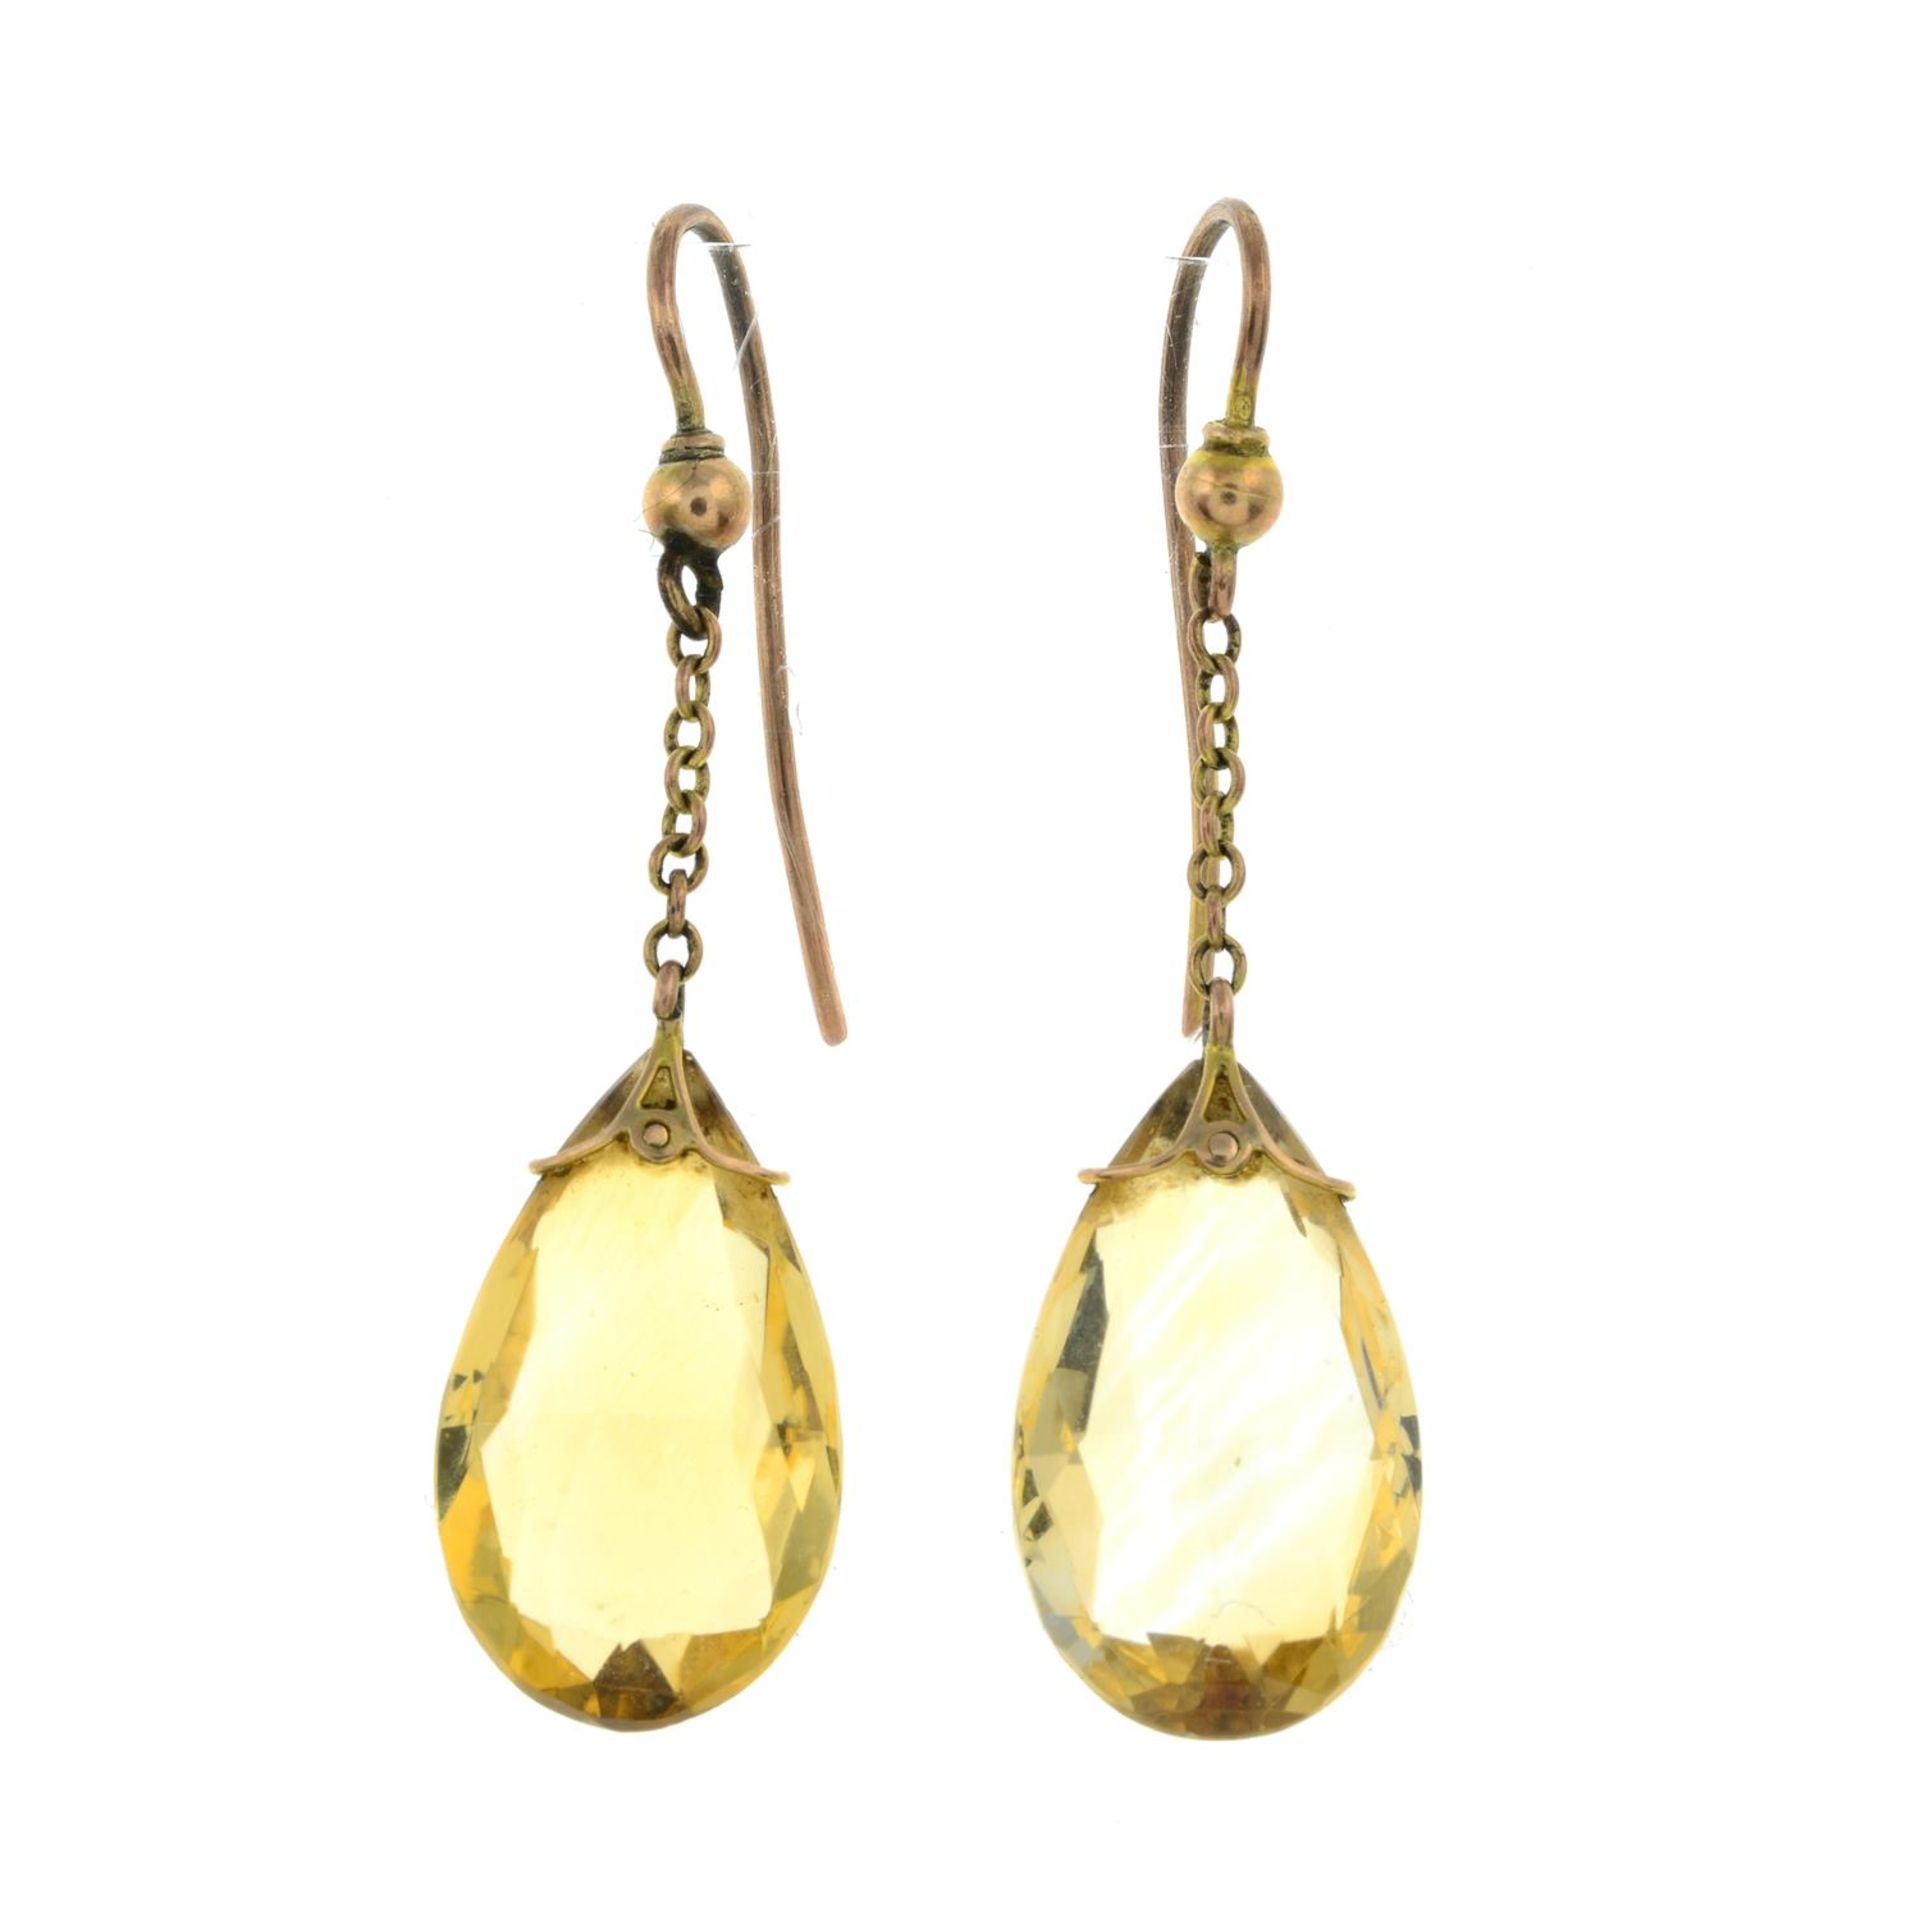 Early 20th century gold citrine earrings